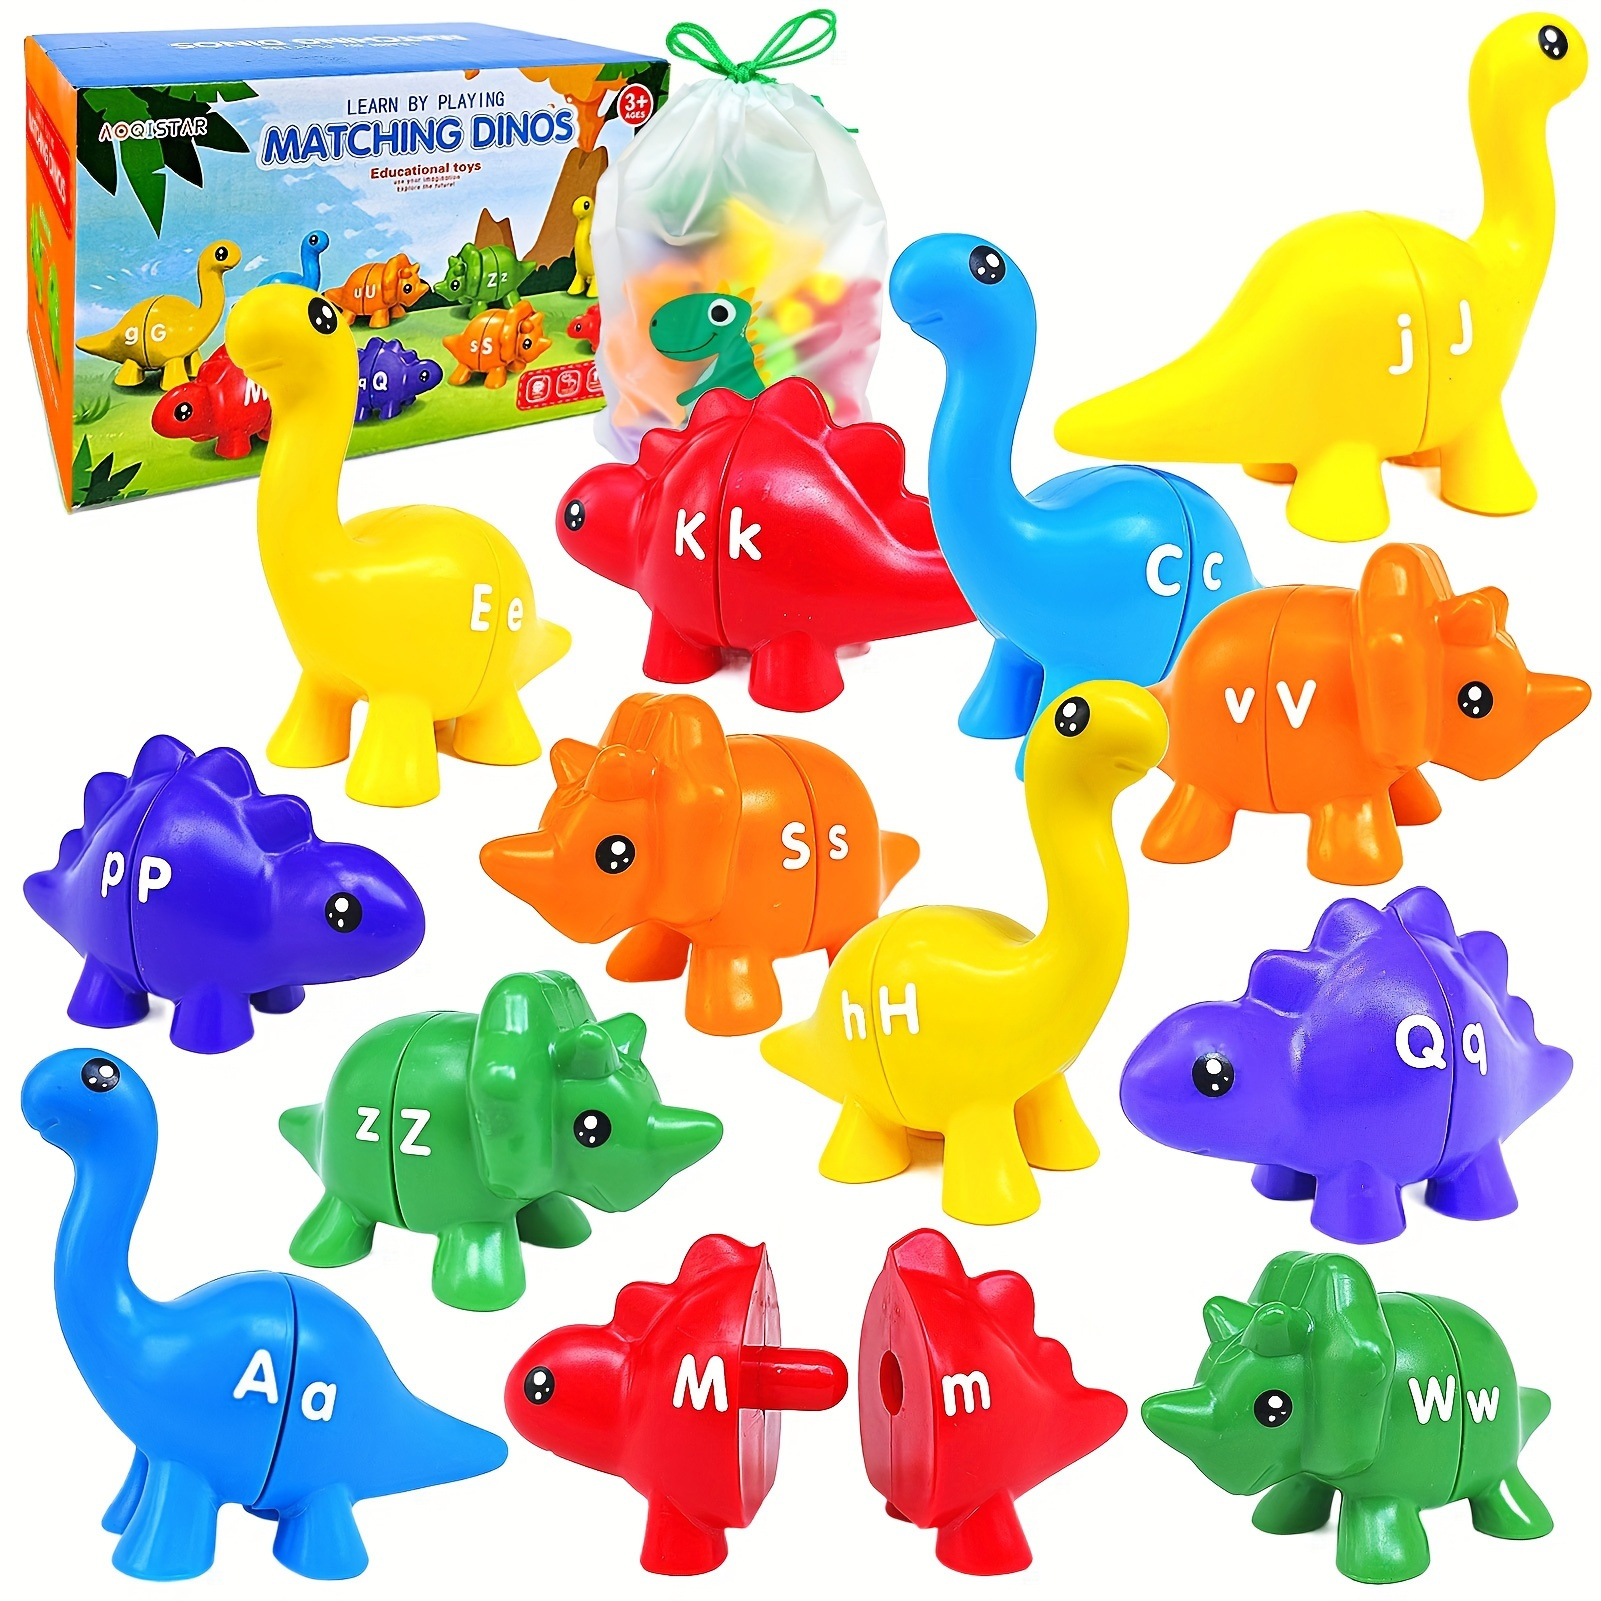 

Dinosaur Matching Toys For Kids - Mypre Educational Montessori Learning Set With Alphabet & Numbers 1-10, Fine Motor Skills Development, Sensory Trash Can Game For Boys & Girls Ages 3-8